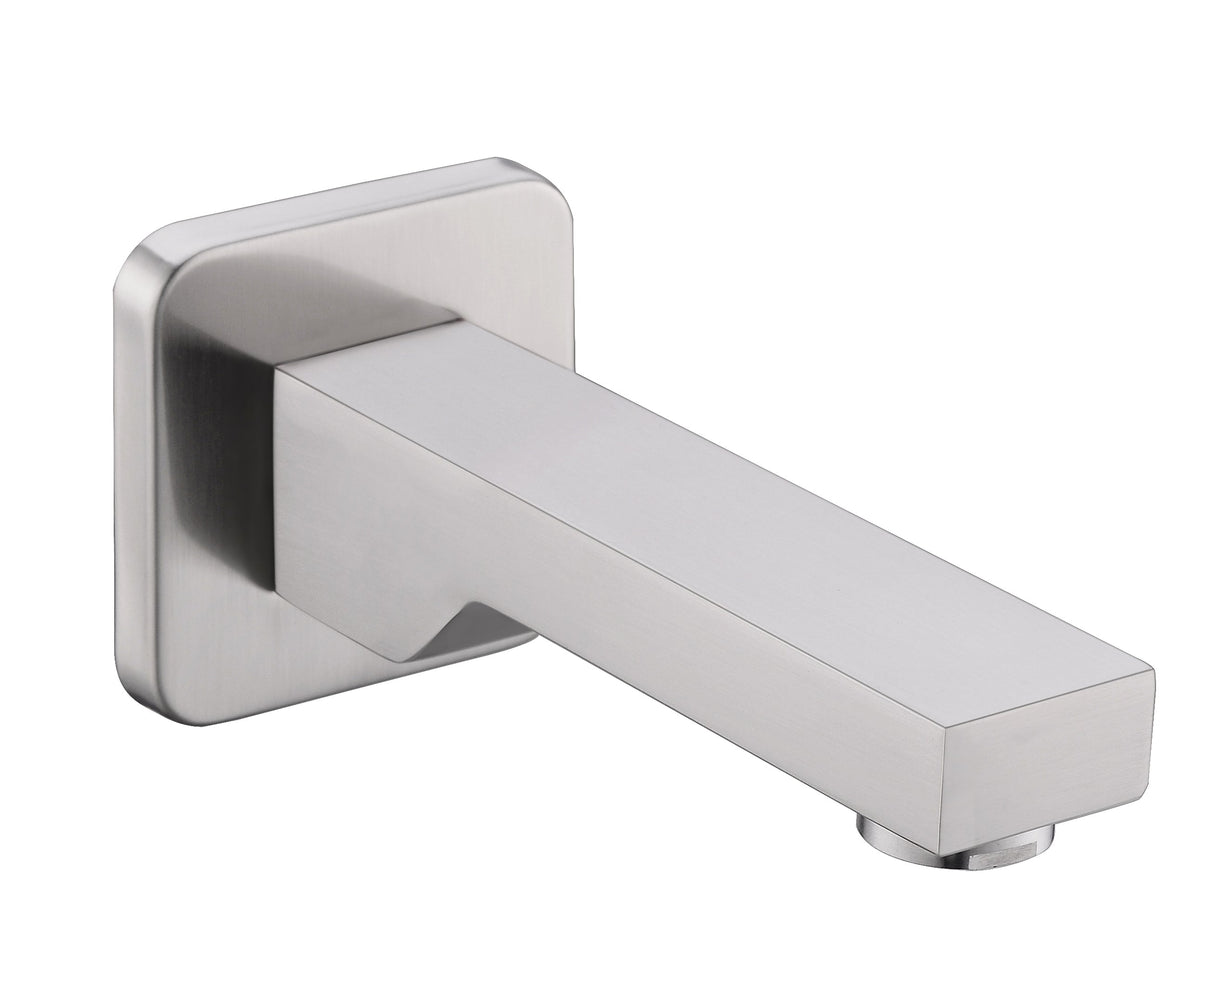 DAX Copper Alloy Tub Spout and Wall Mount, Brushed Nickel DAX-Z2552-BN